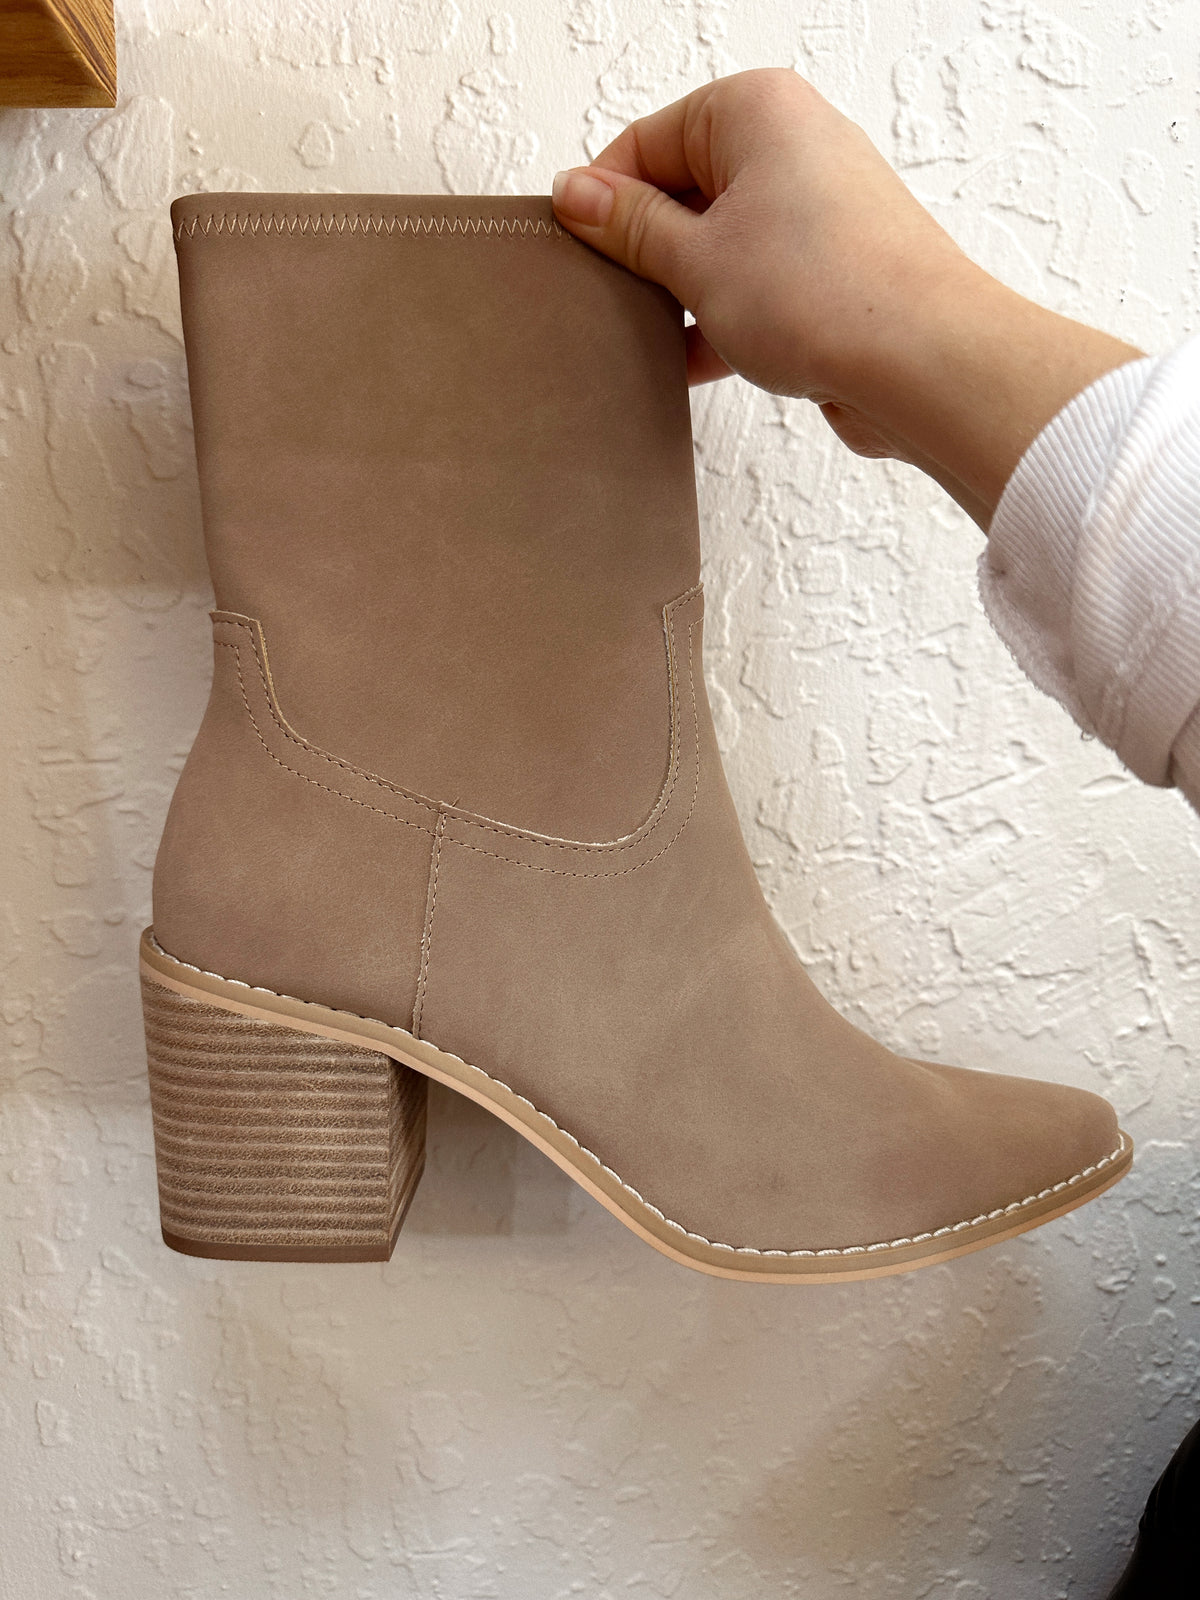 Vienna Ankle High Booties